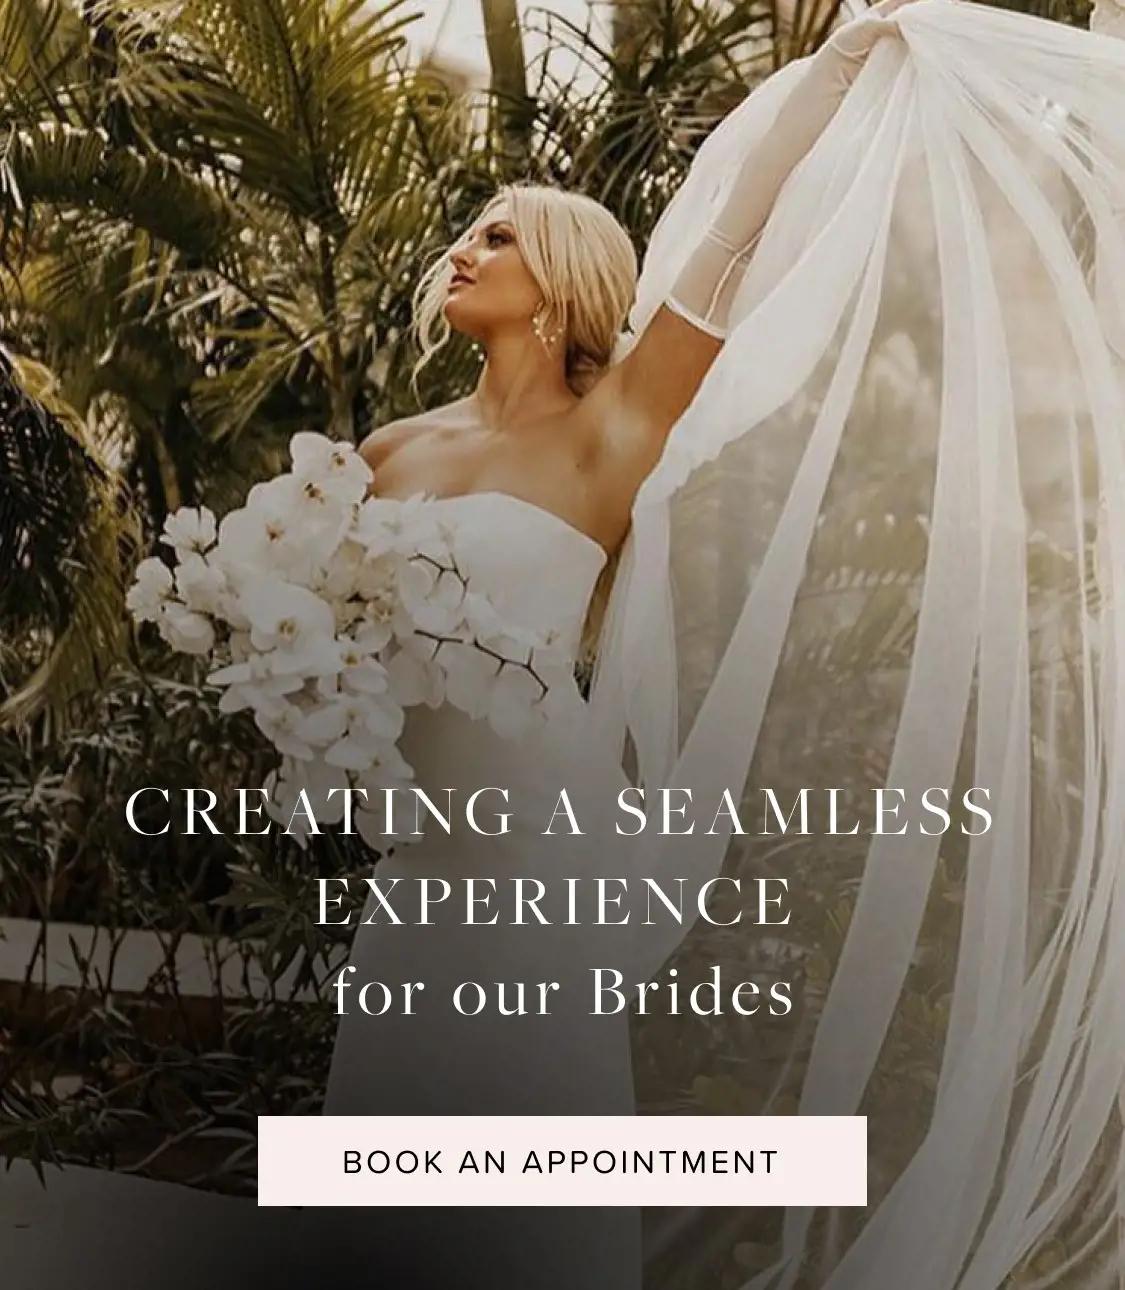 Find your dream wedding dress at Bliss Bridal